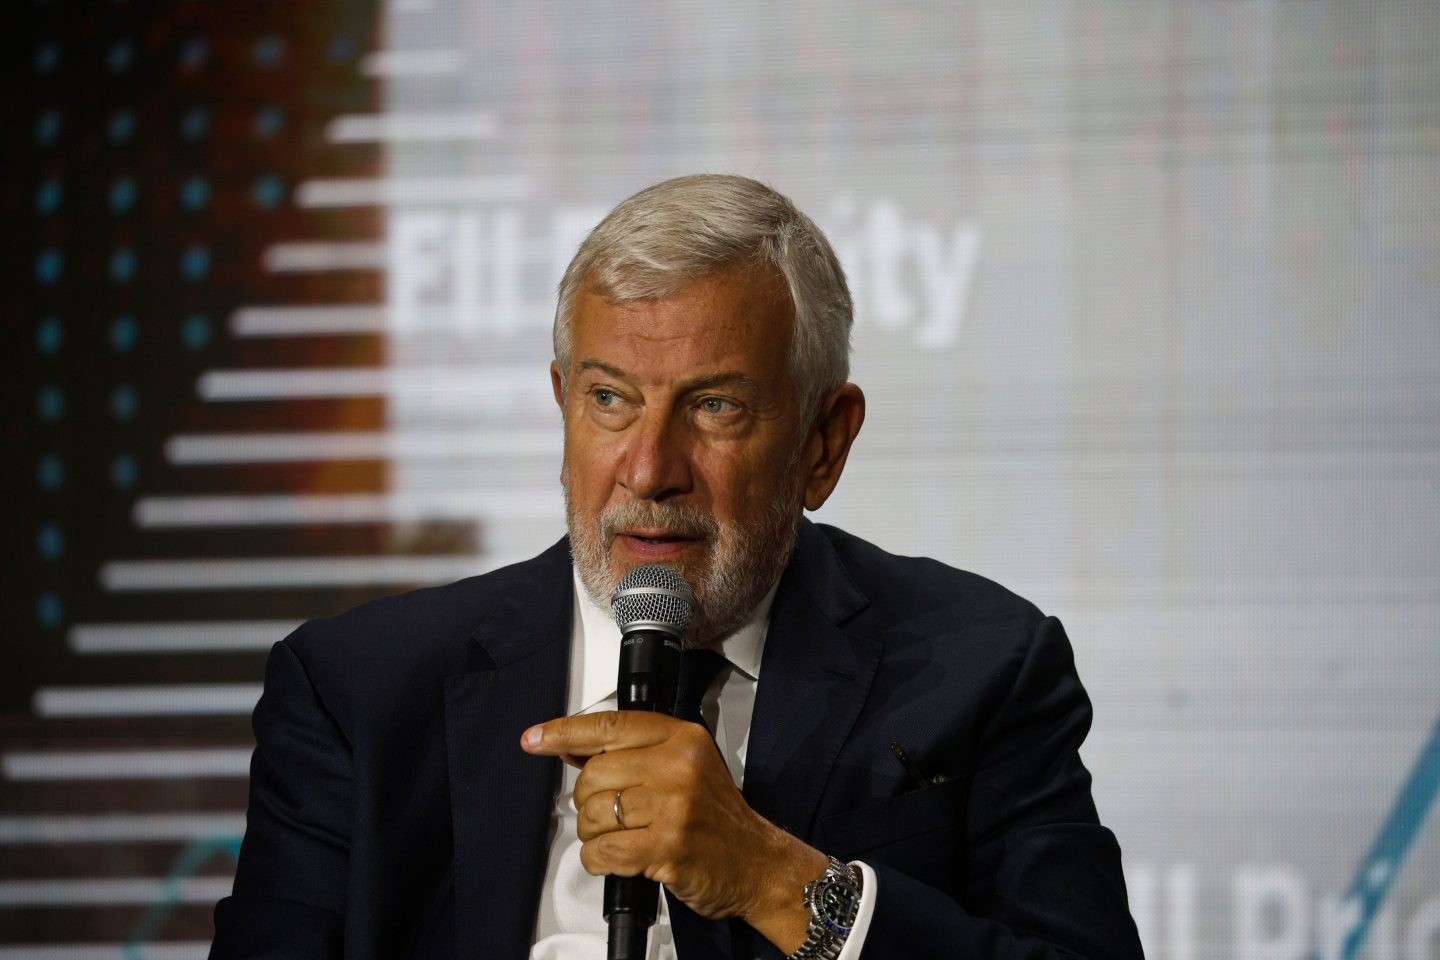 CEO Richard Attias speaks at a Future Investment Initiative (FII) Institute conference in Rio de Janeiro in June. The FII, which is backed by Saudi Arabia's nearly $1 trillion sovereign Public Investment Fund, hosted its first Latin America-focused investment conference.